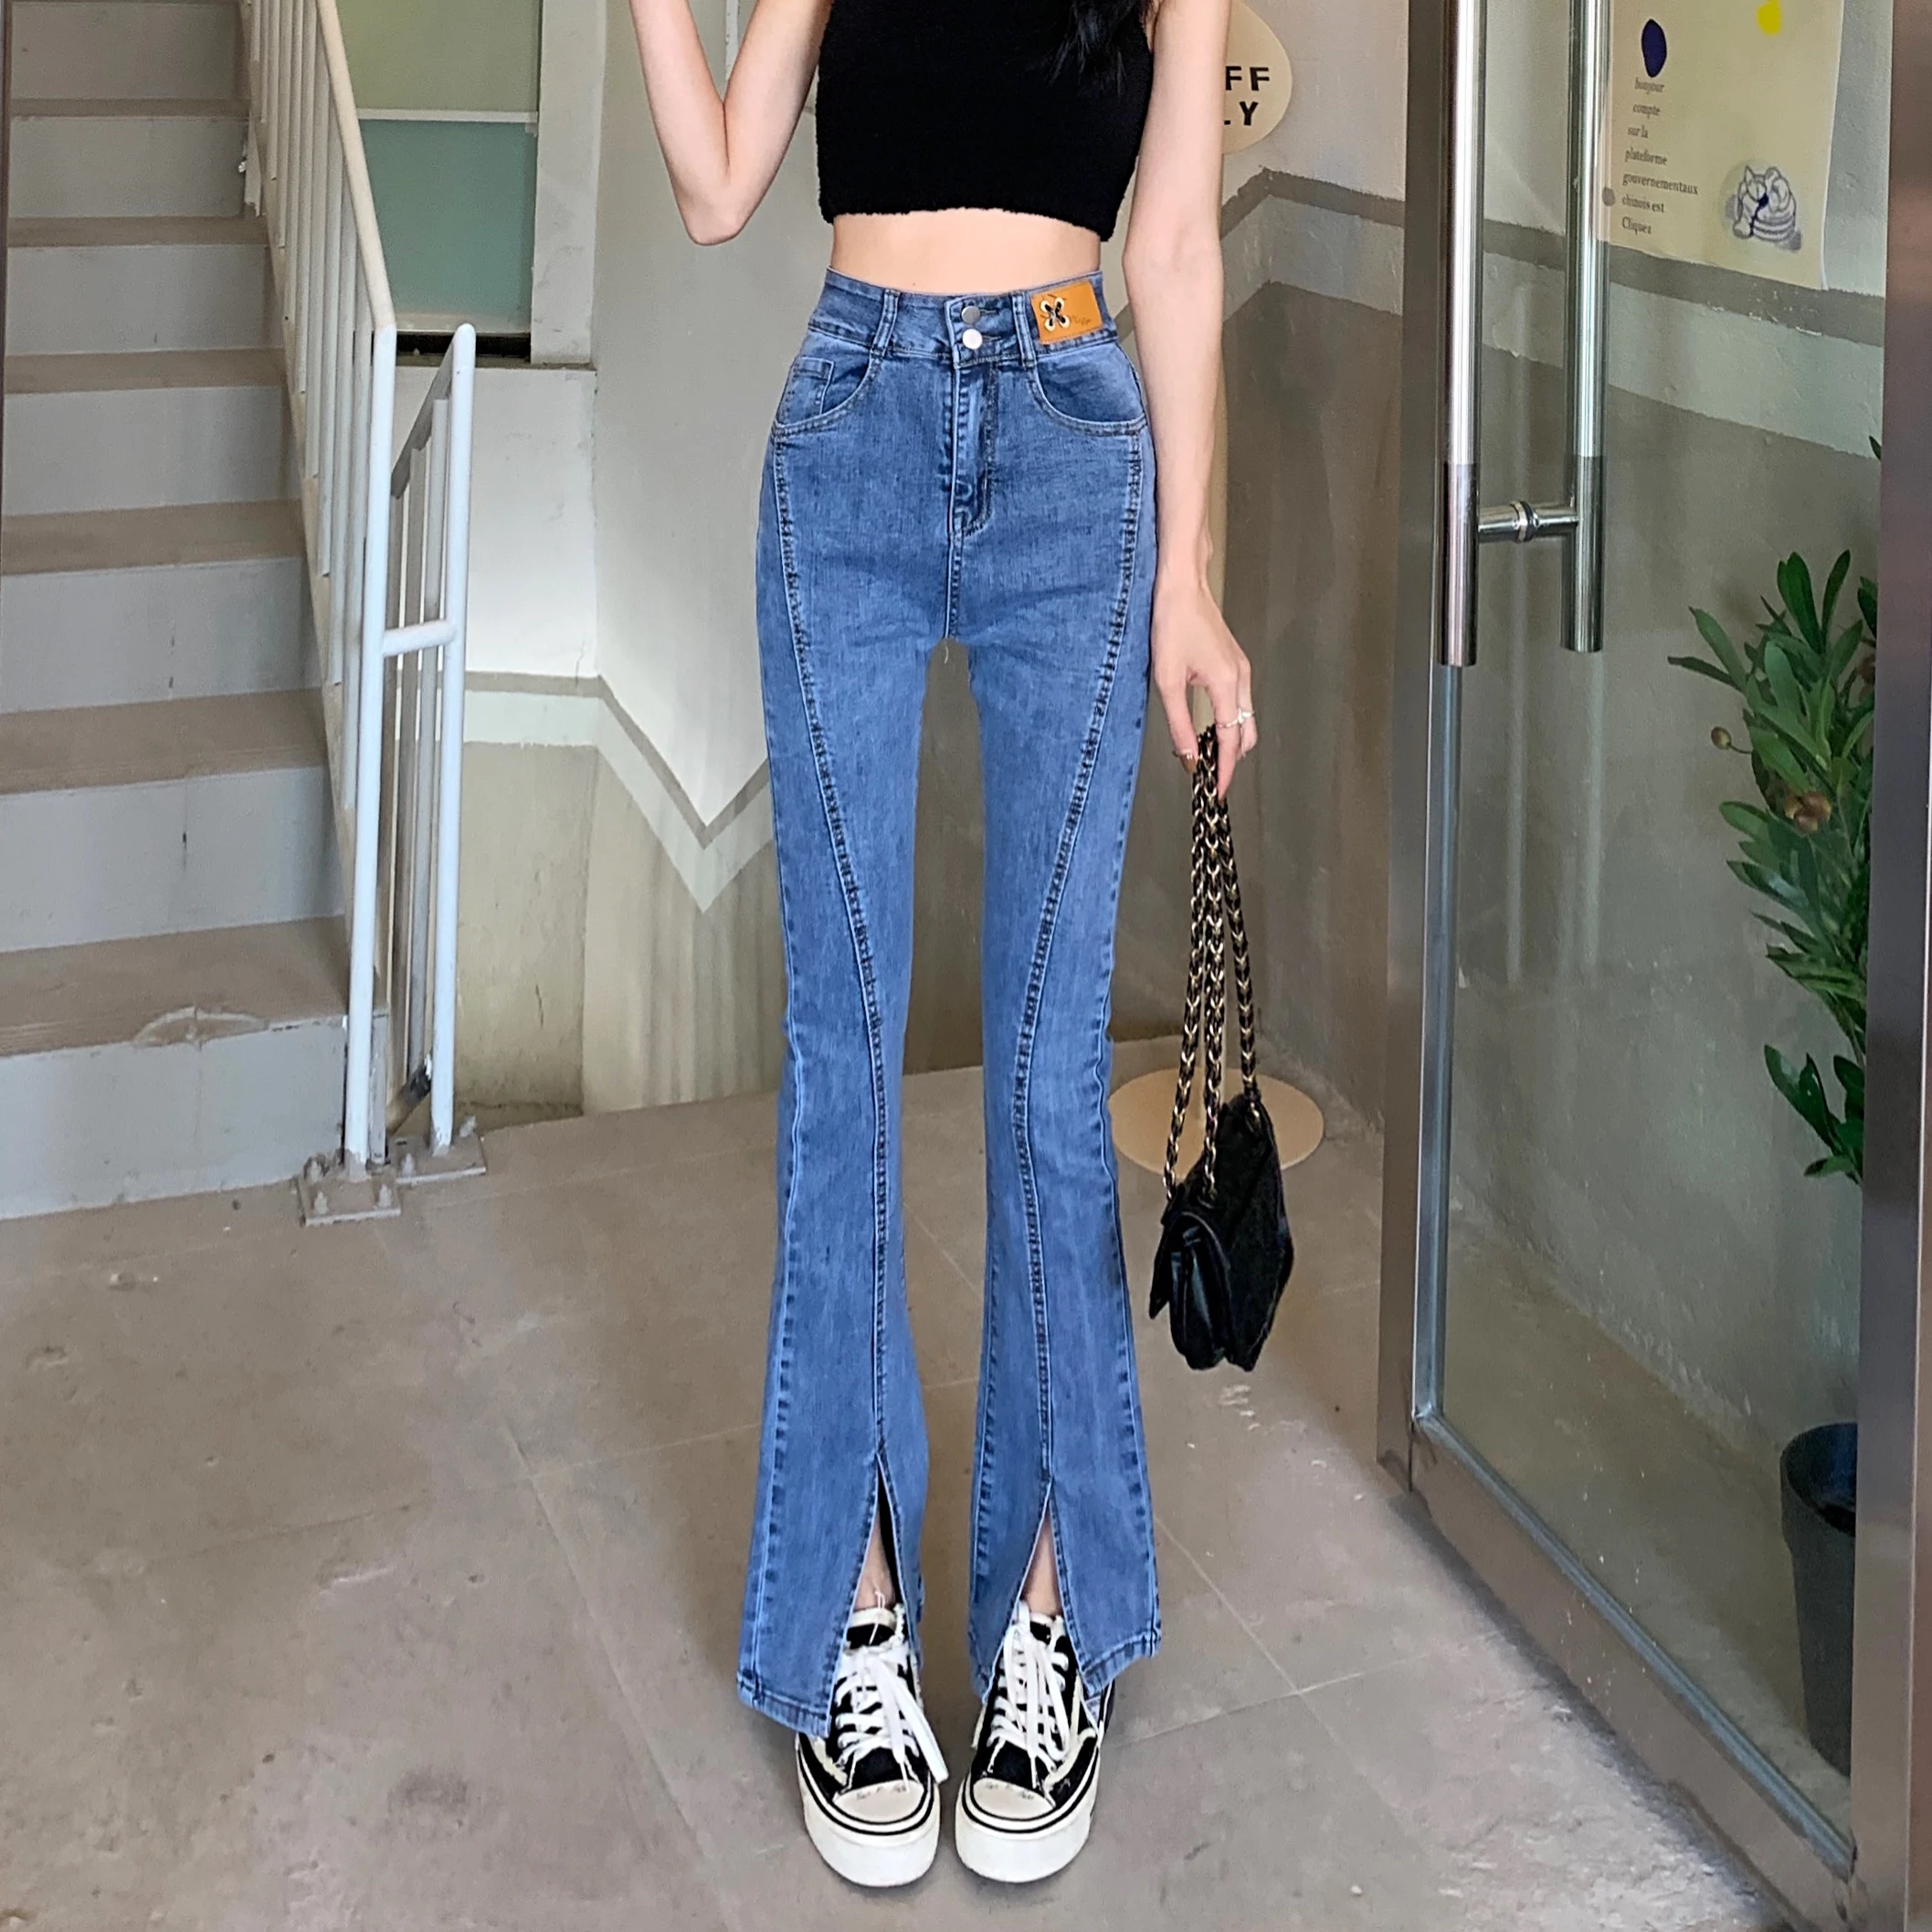 N1398  Straight-leg jeans women's new design high-waisted slim slit micro-flare all-match pants jeans